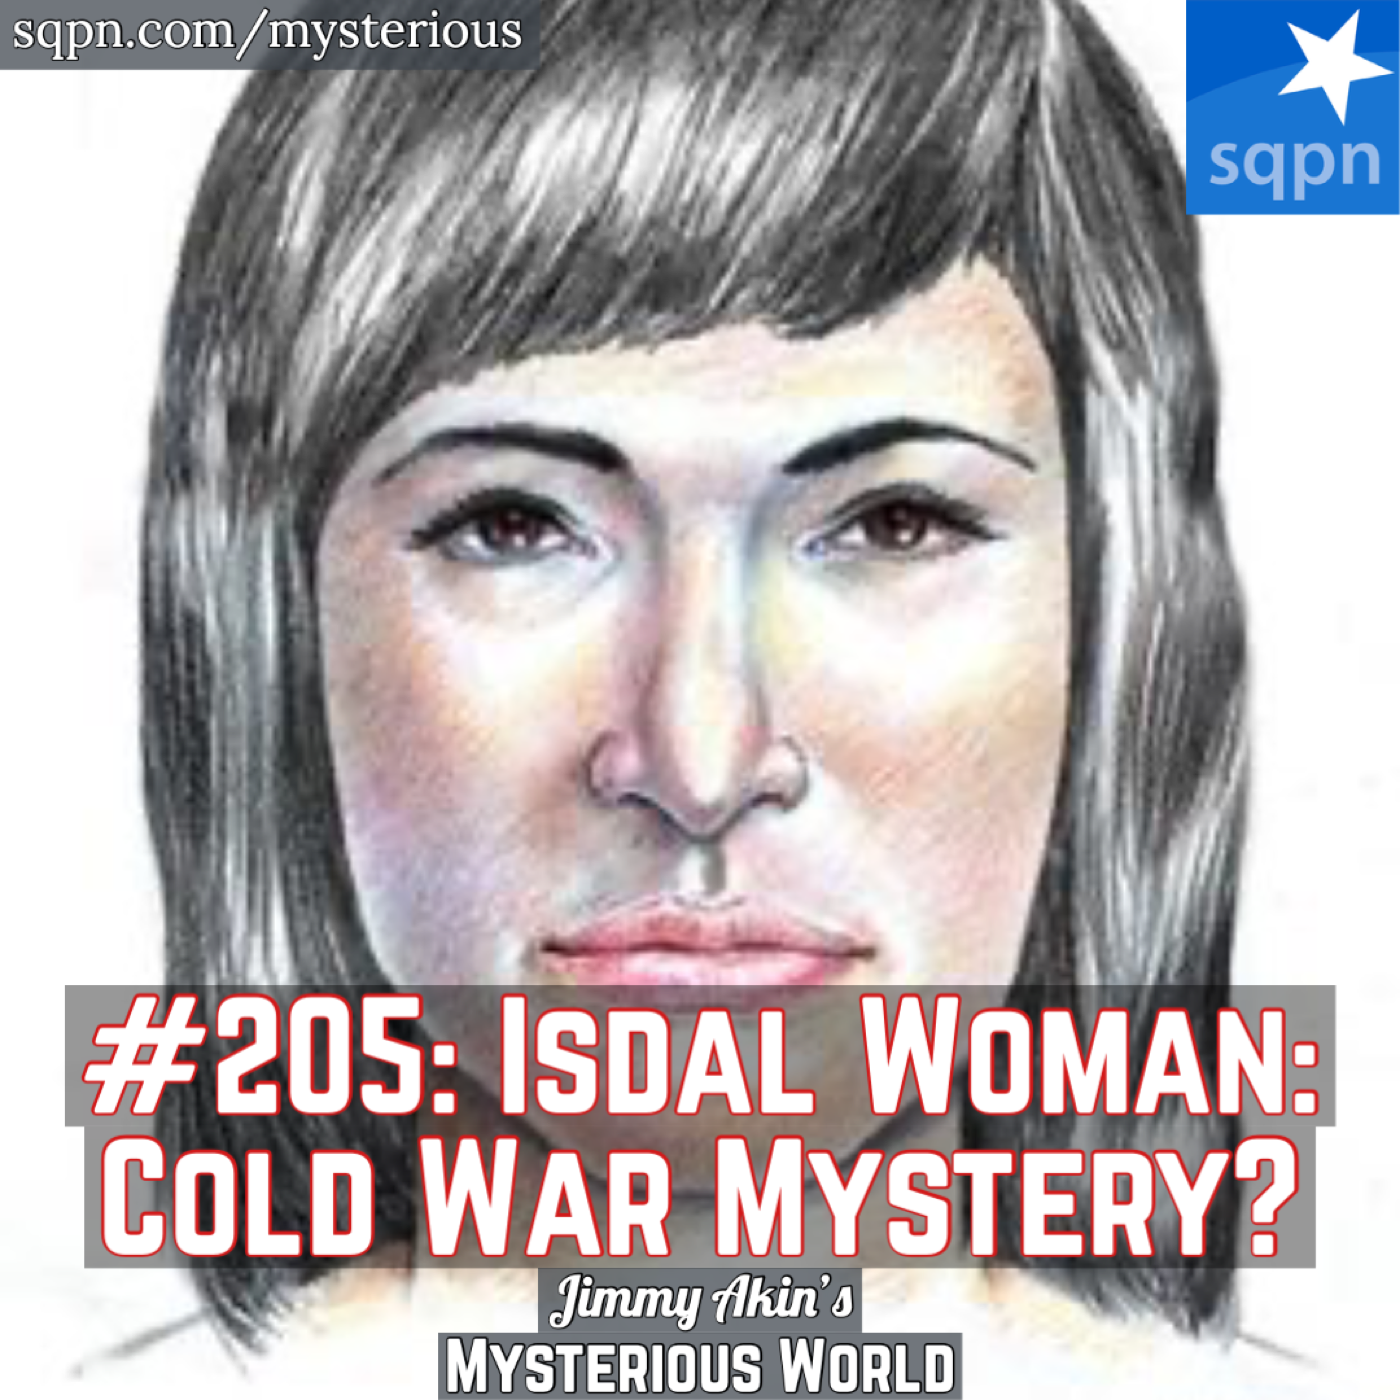 Isdal Woman (Cold War Mystery)